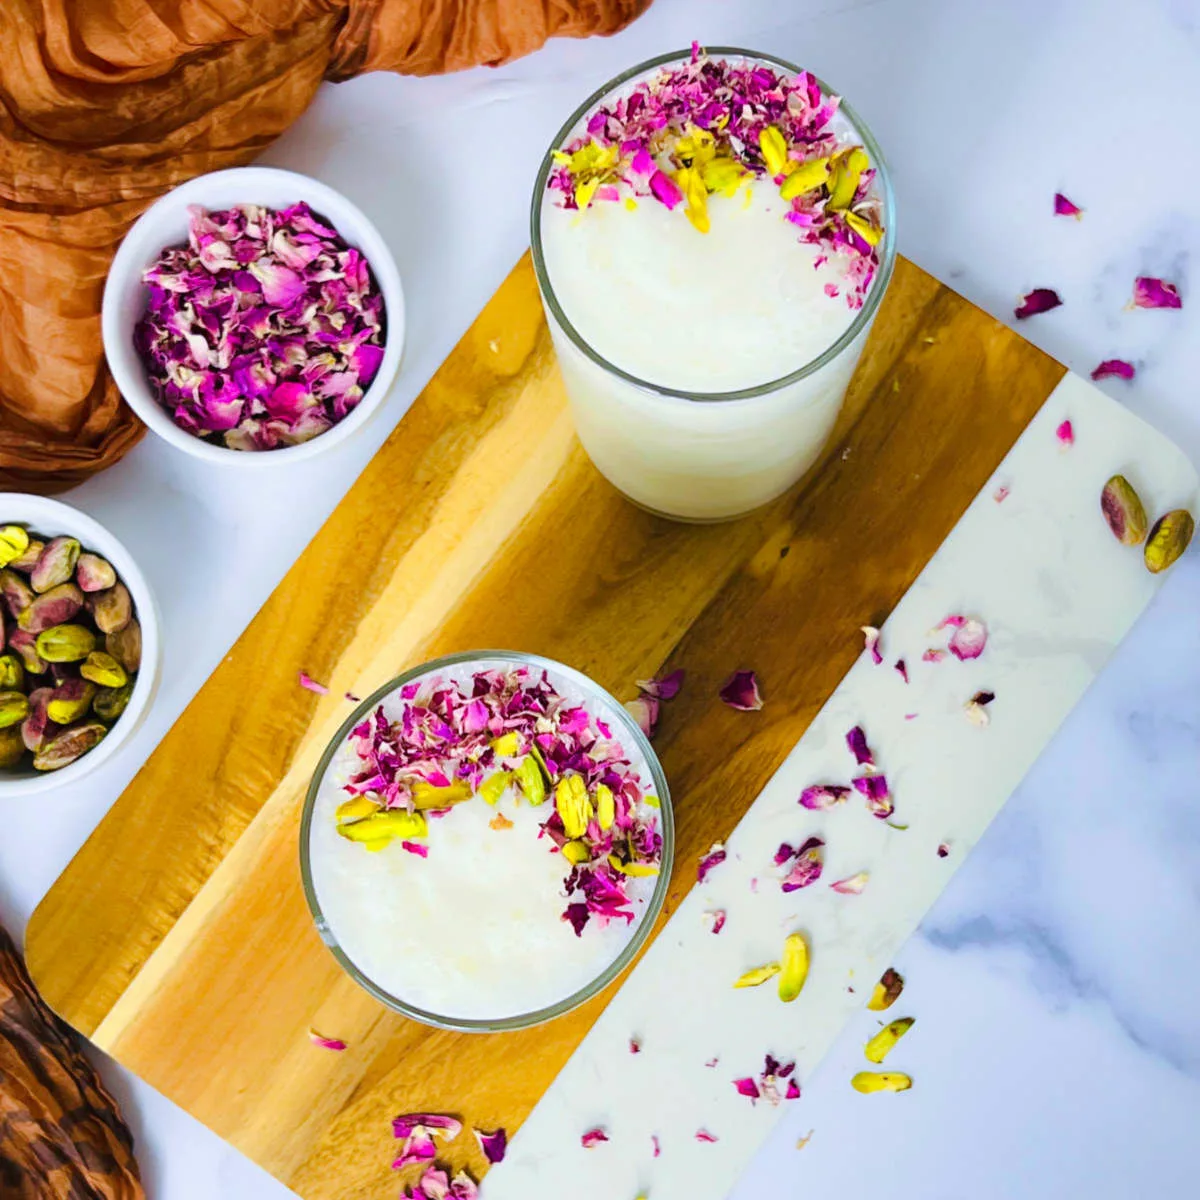 Sweet lassi placed on a wooden board with rose petals and pistachio in the background.